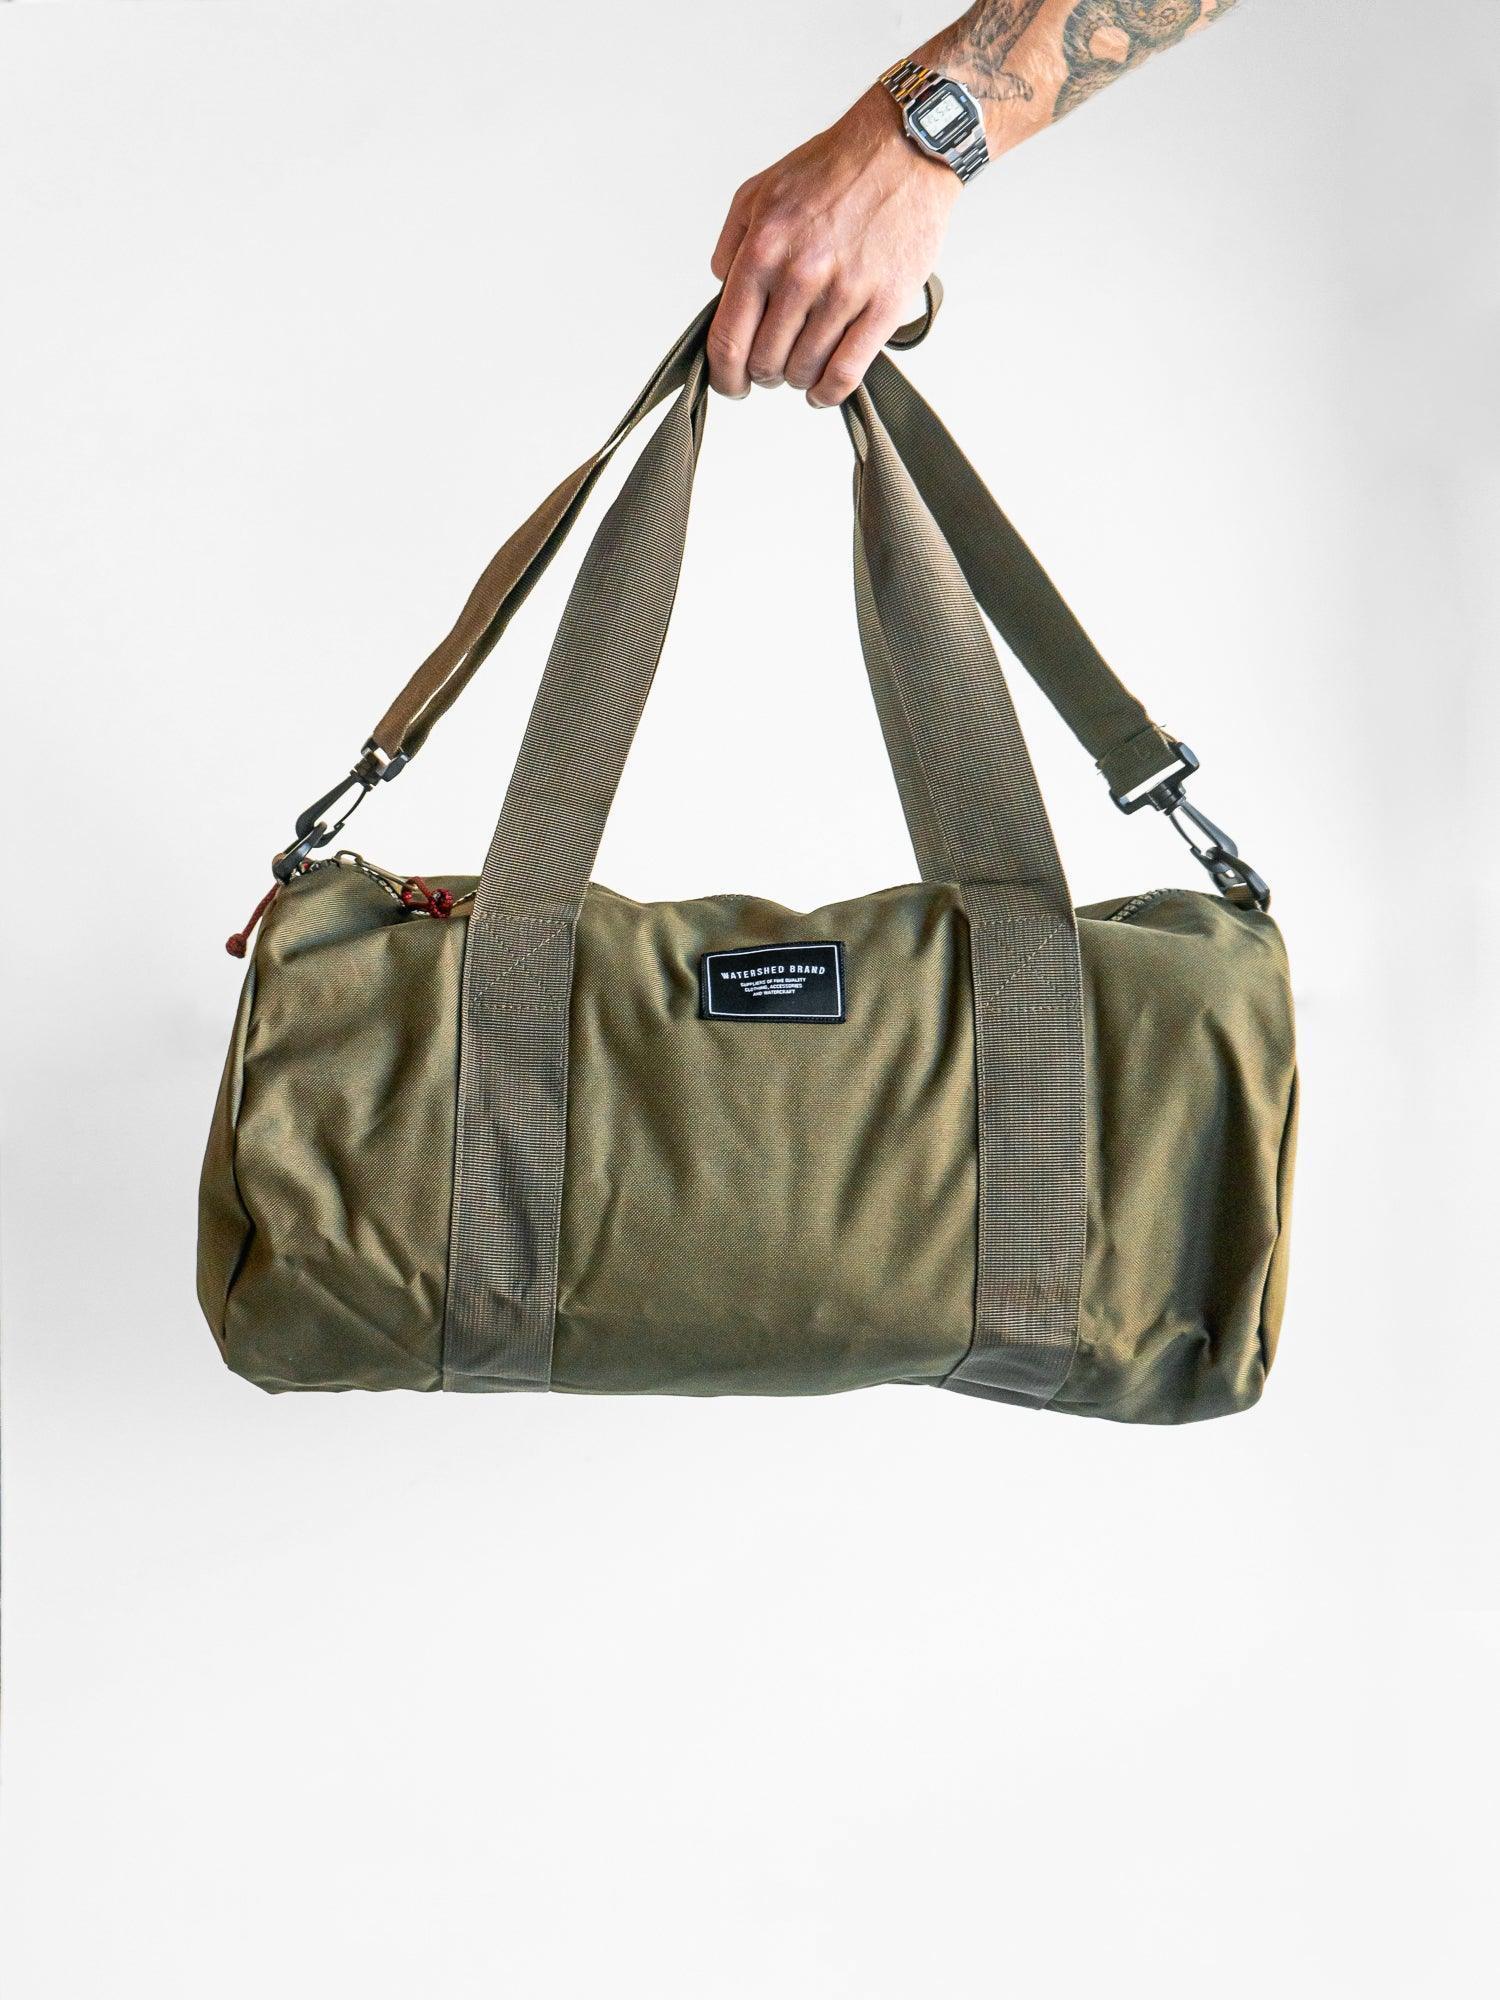 Union Duffle Bag - Watershed Brand